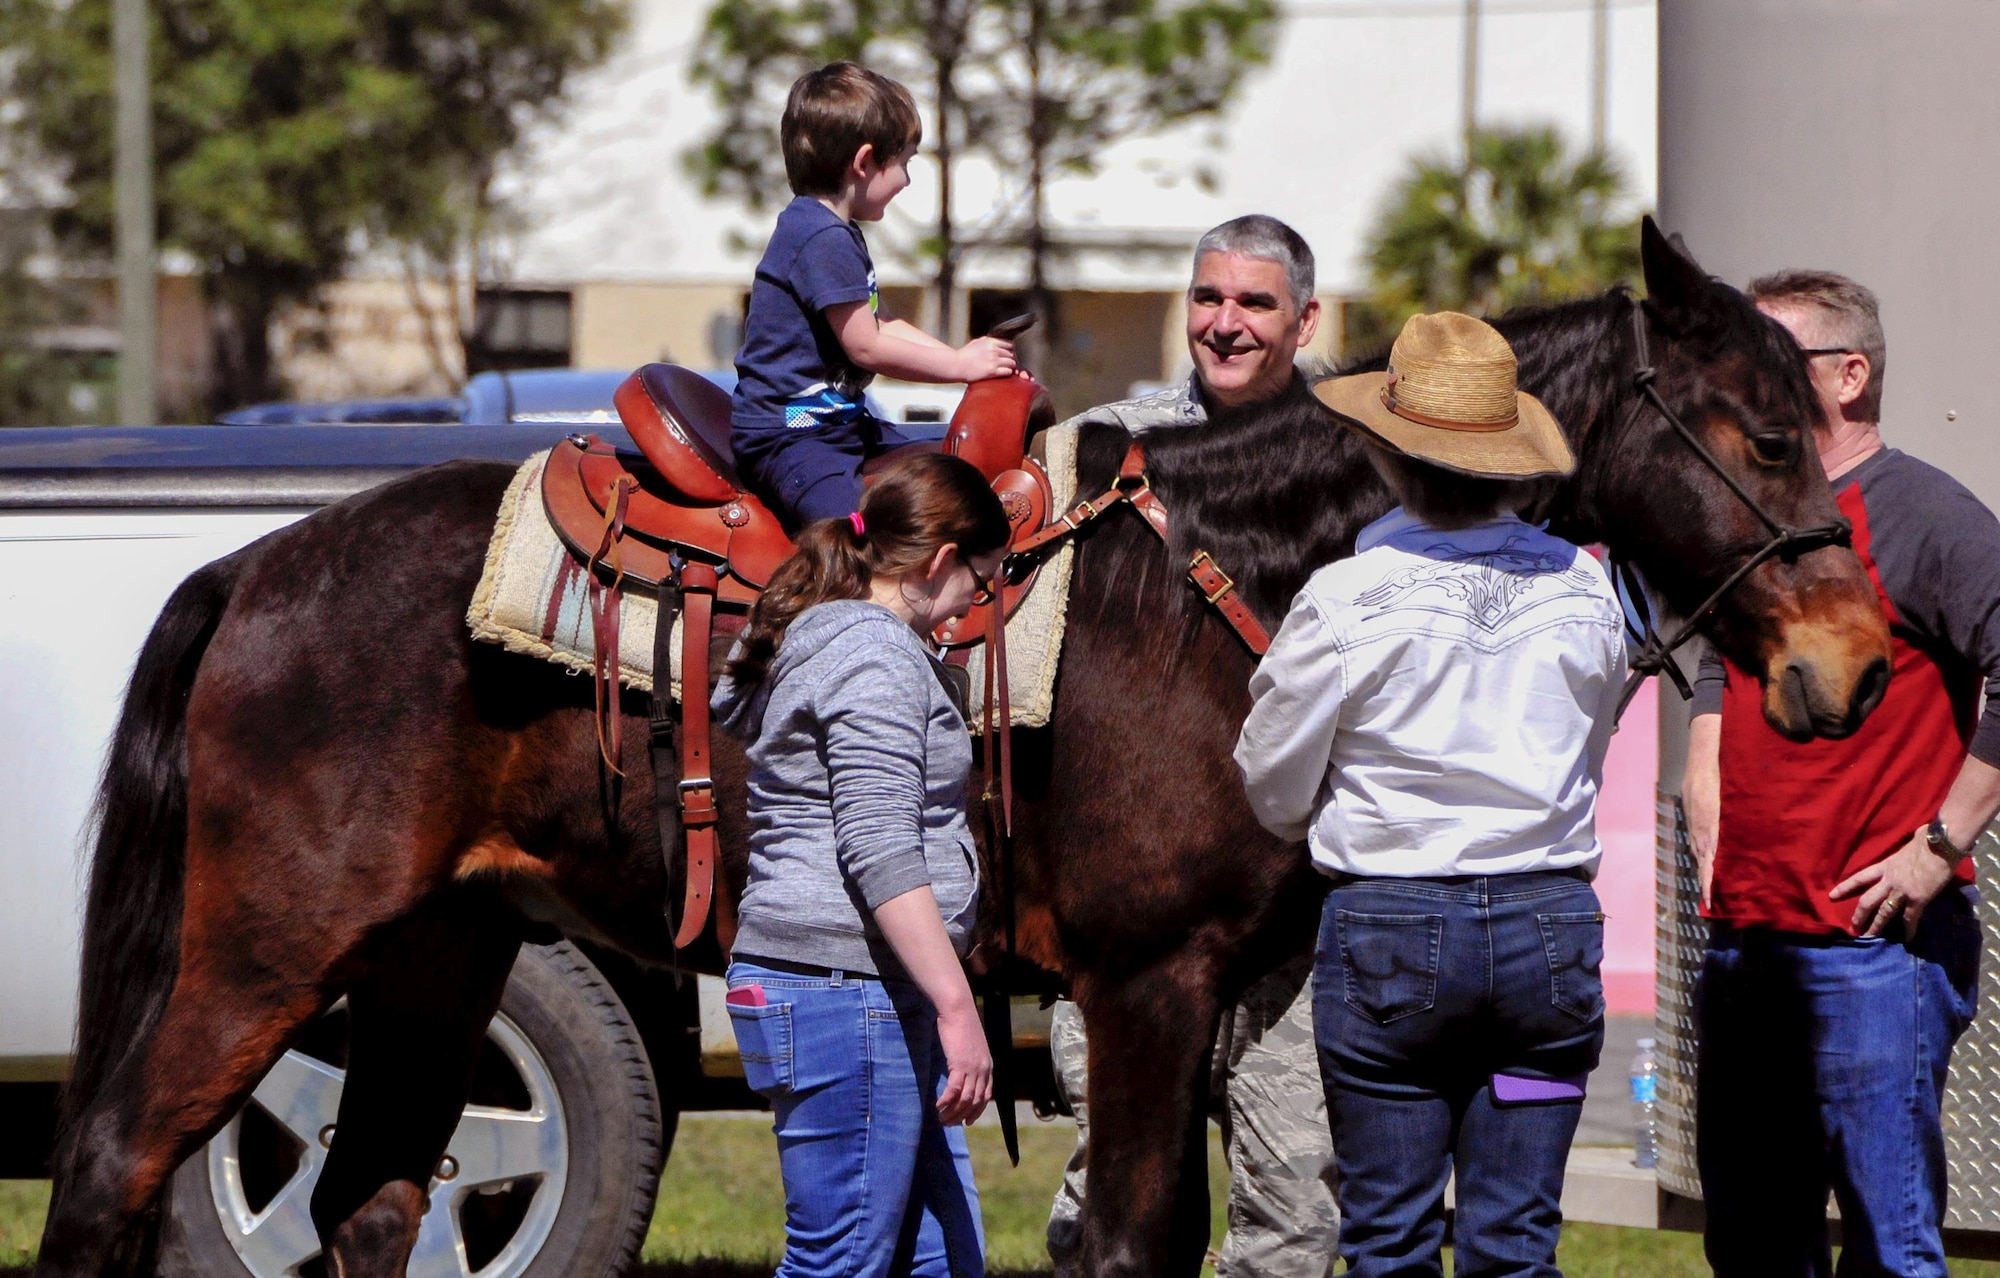 Col. James Phillips, the 919th Special Operations Wing commander, greets a family member during a pony ride at the unit’s annual Wing Day March 4 at Duke Field, Fla.  The wing sets aside a special day each year to show appreciation for its reservists and their family members. Events included music, food, children’s games, etc. (U.S. Air Force photo/Tech. Sgt. Kimberly Moore)